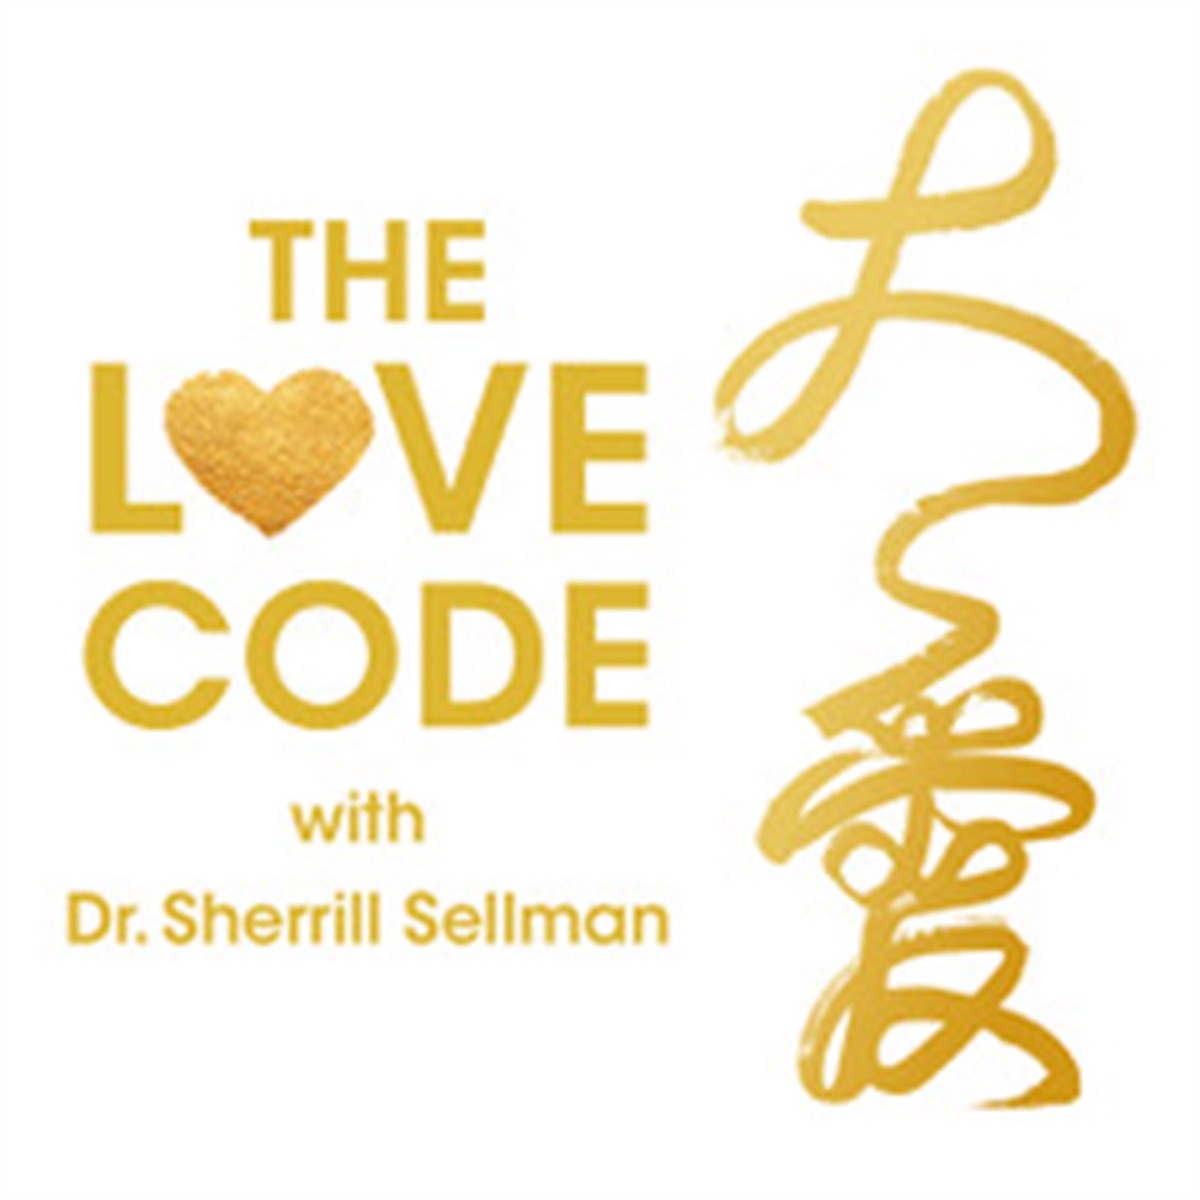 Love code. Lovely code. Coders Love. A code for Love.